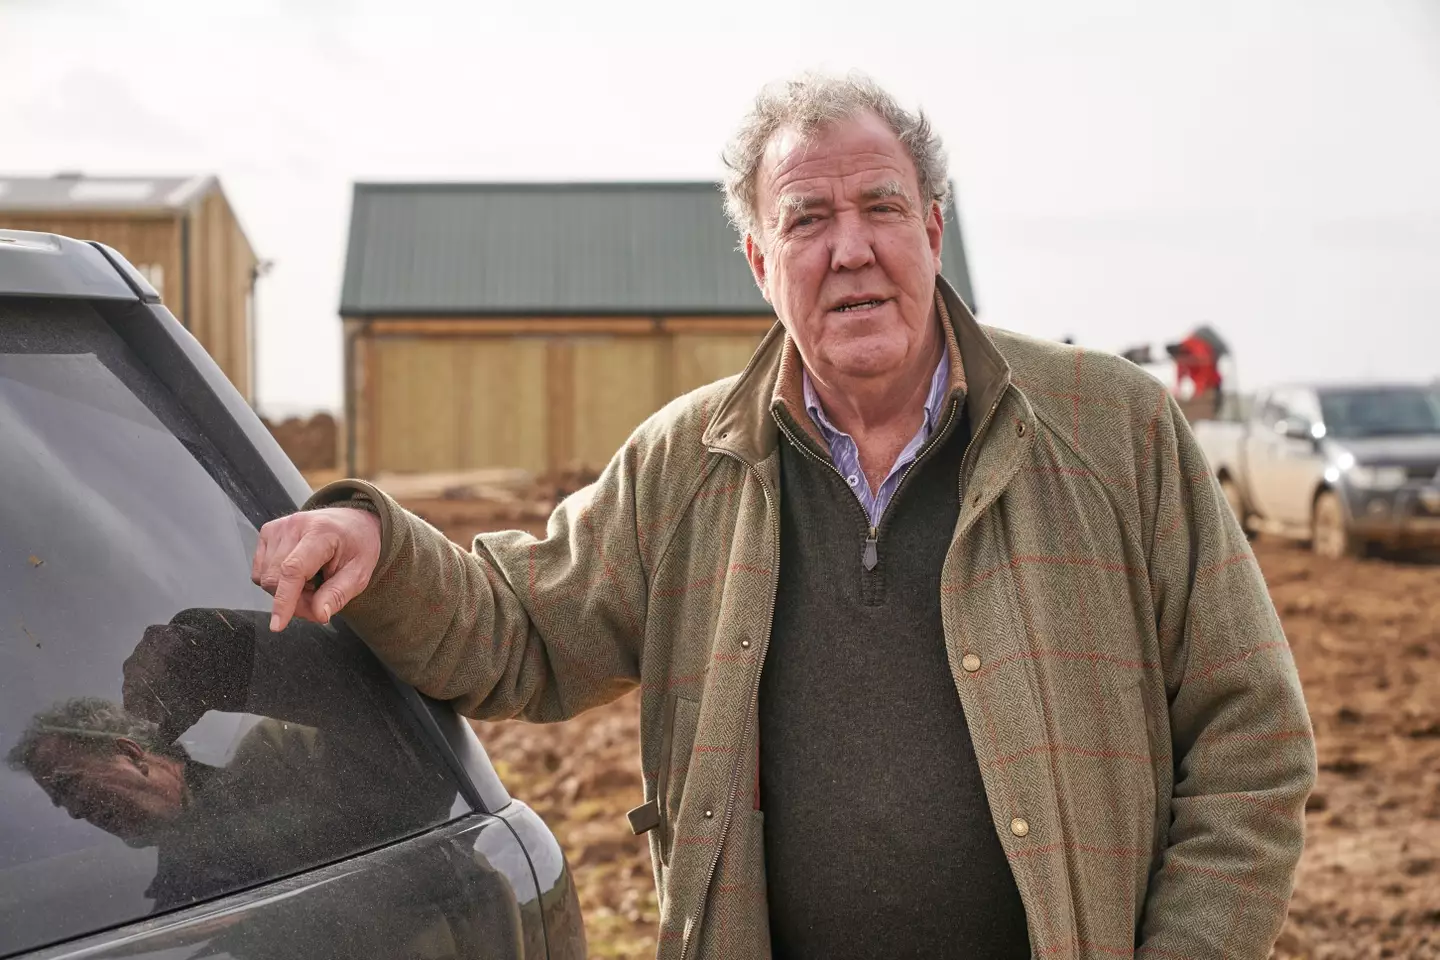 Jeremy Clarkson has received over £250,000 in subsidies.